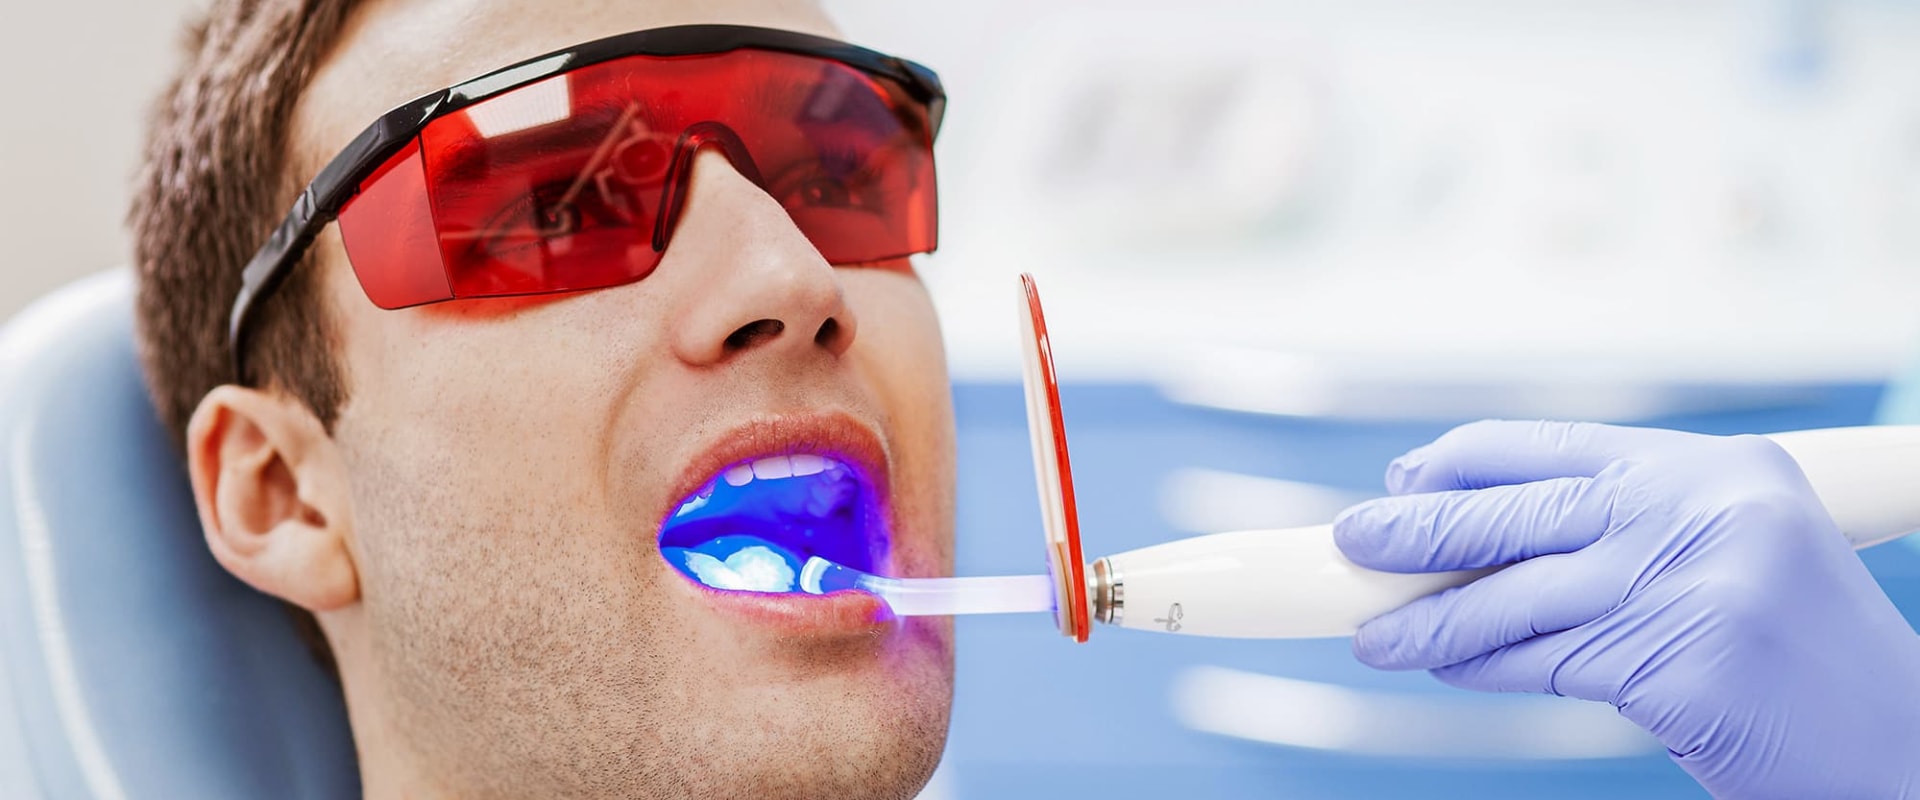 Is laser technology used in dentistry?